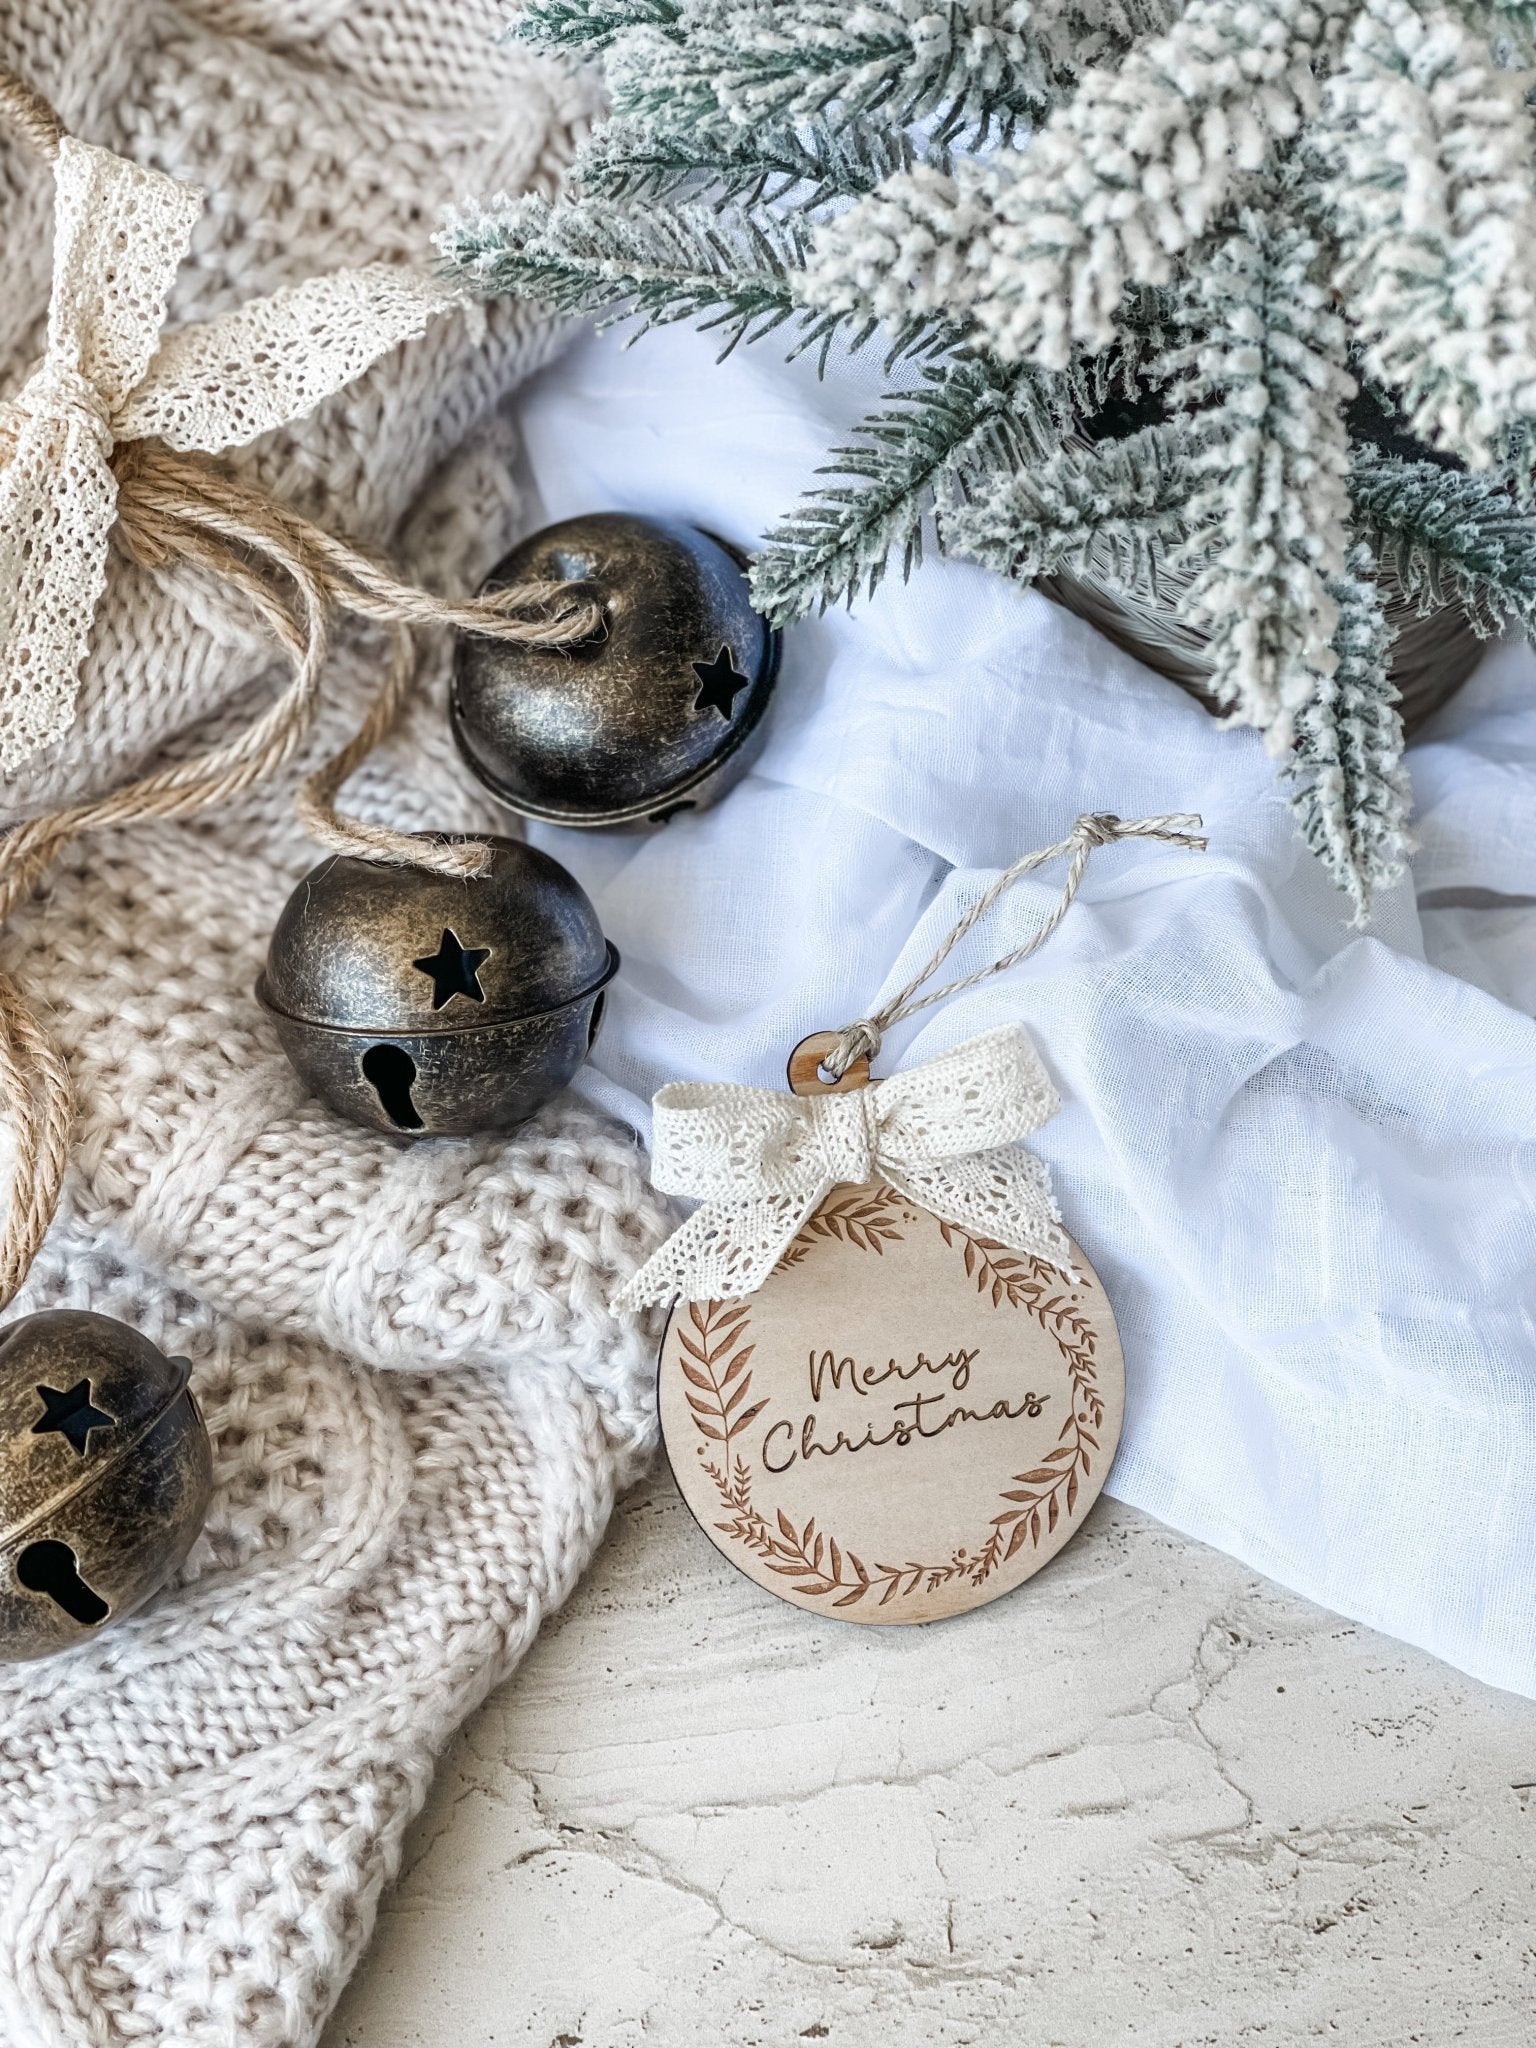 Merry Christmas Wooden Ornament - The Humble Gift Co.